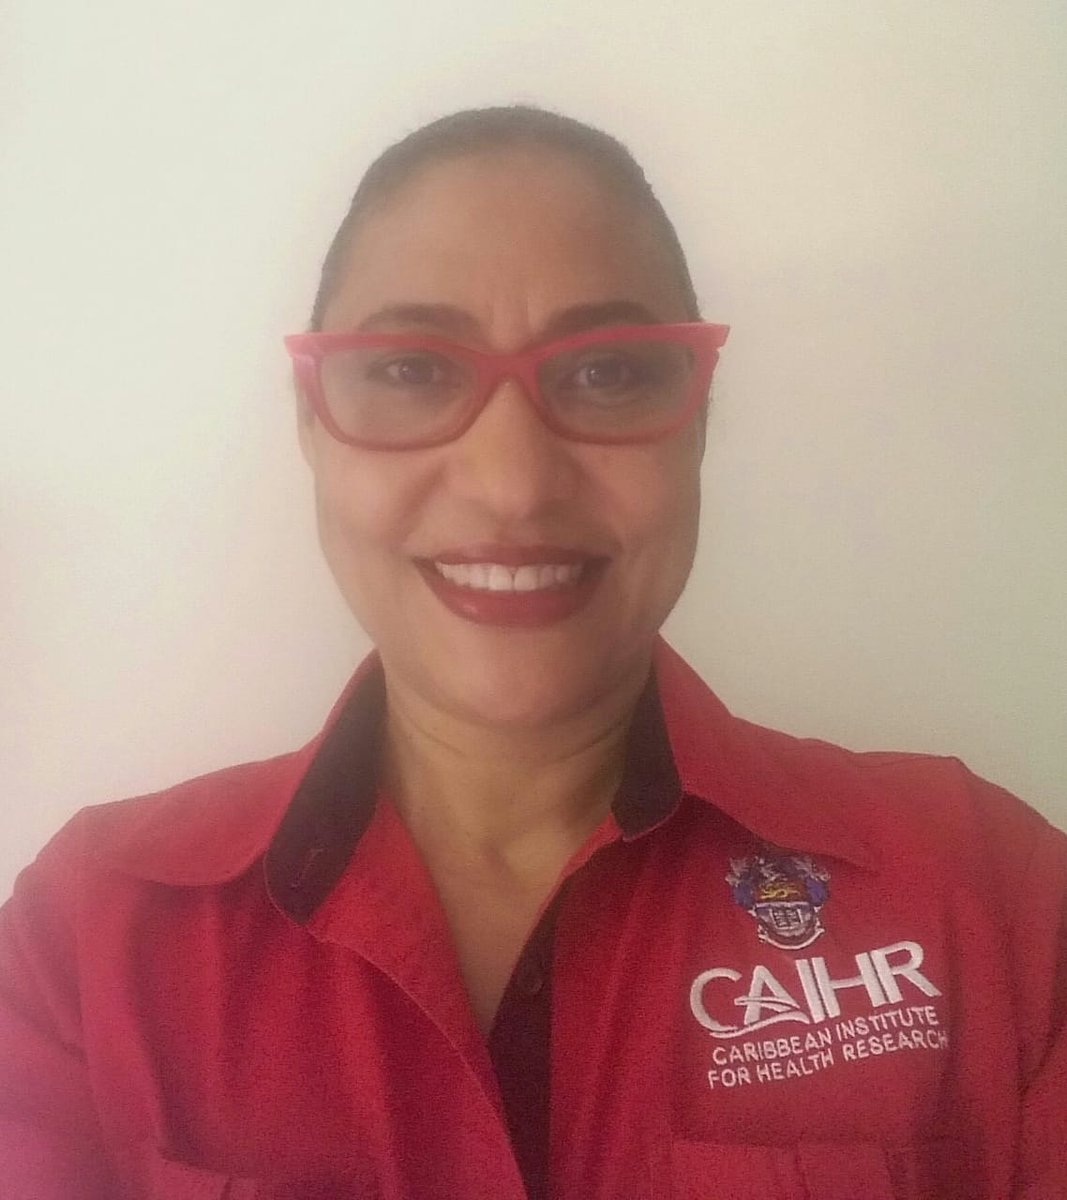 Thank you Dr. Suzanne Soares Wynter,  @CAIHRJa for supporting World Heart Day ❤
#UseHeart❤
#WorldHeartDay2020